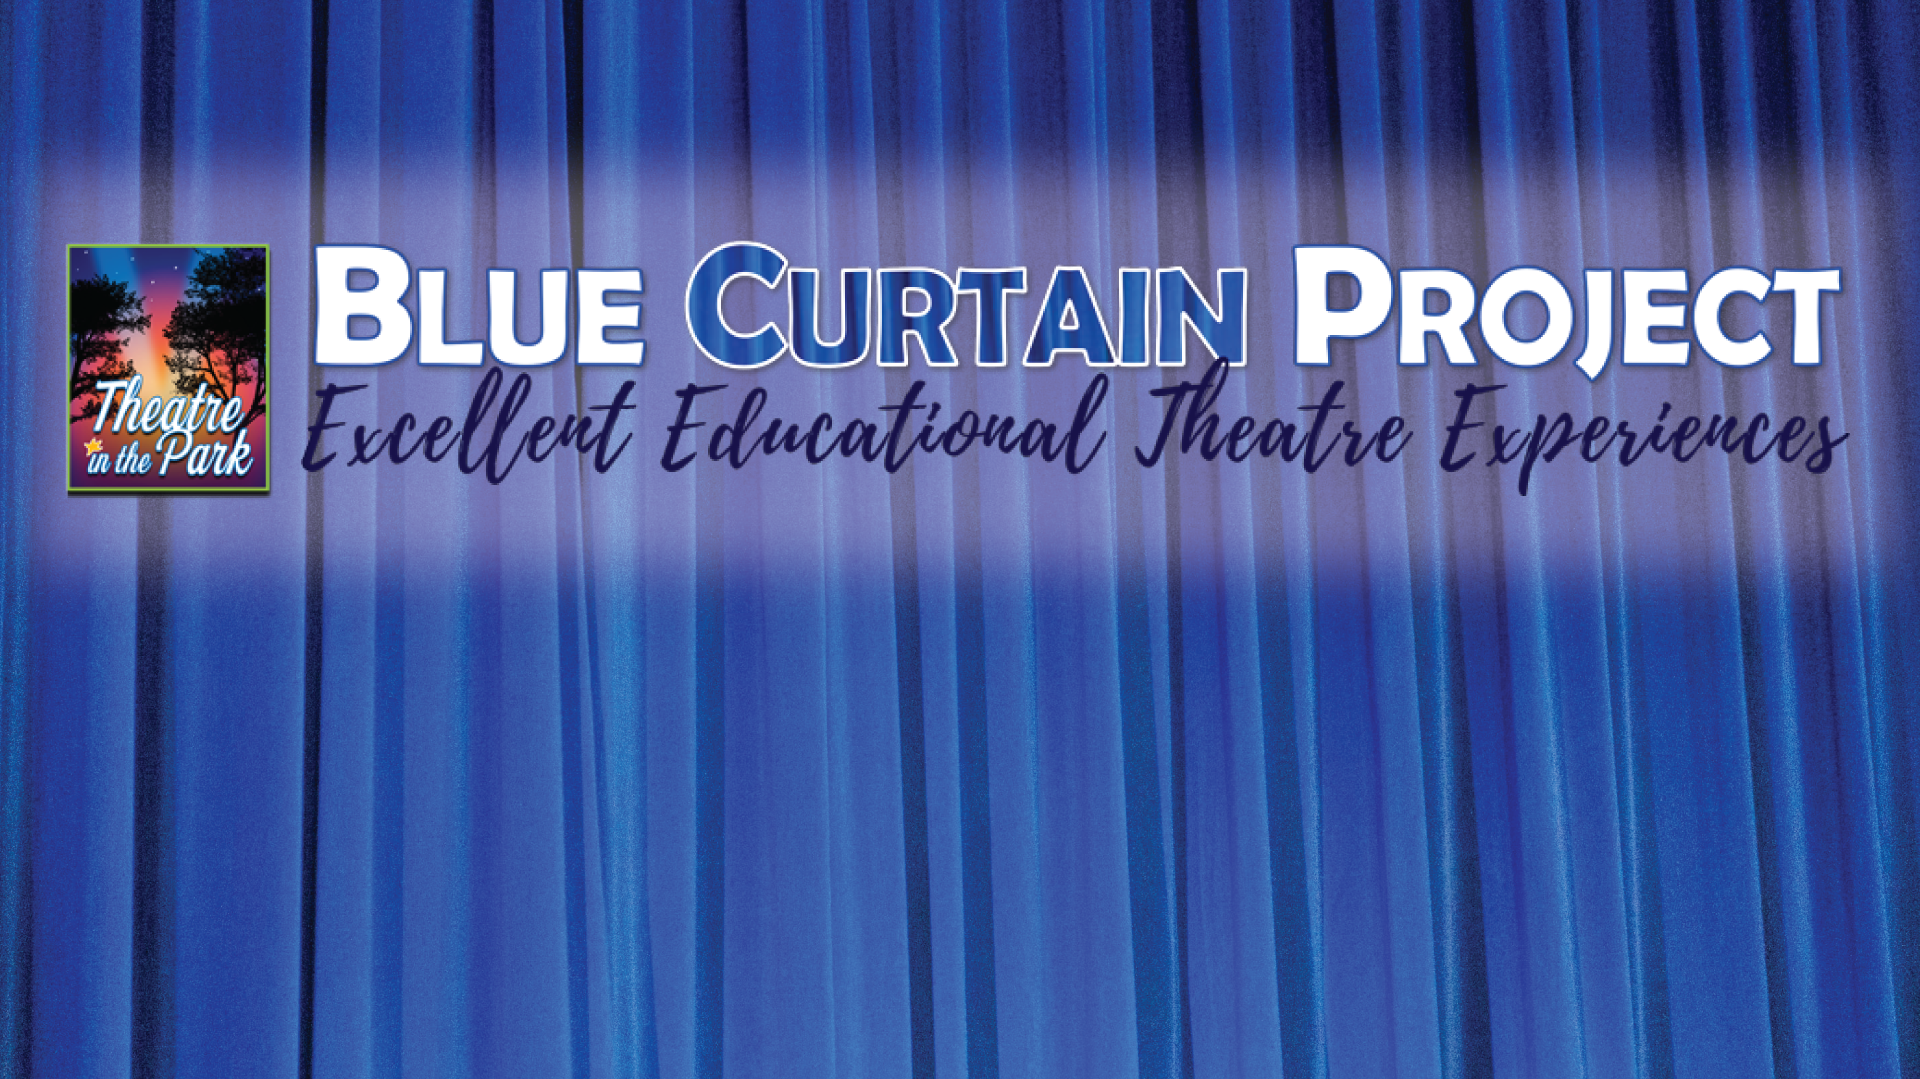 Inside Jcprd Theatre In The Park Launches New Blue Curtain Project